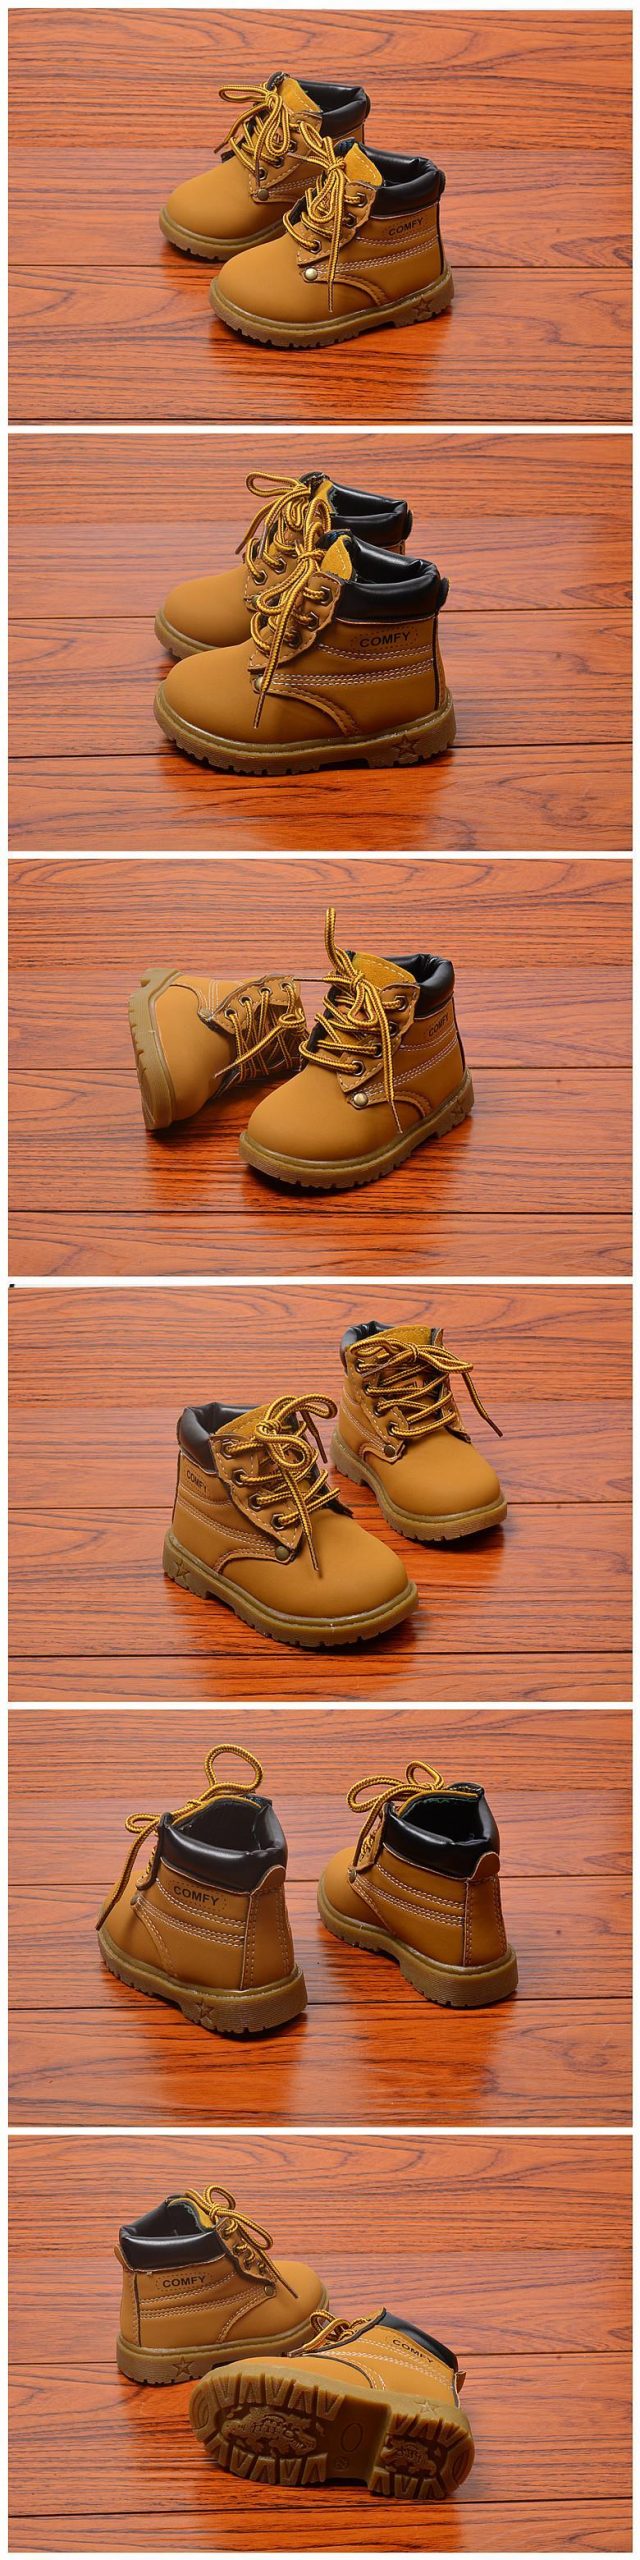 Winter Boots for Toddlers